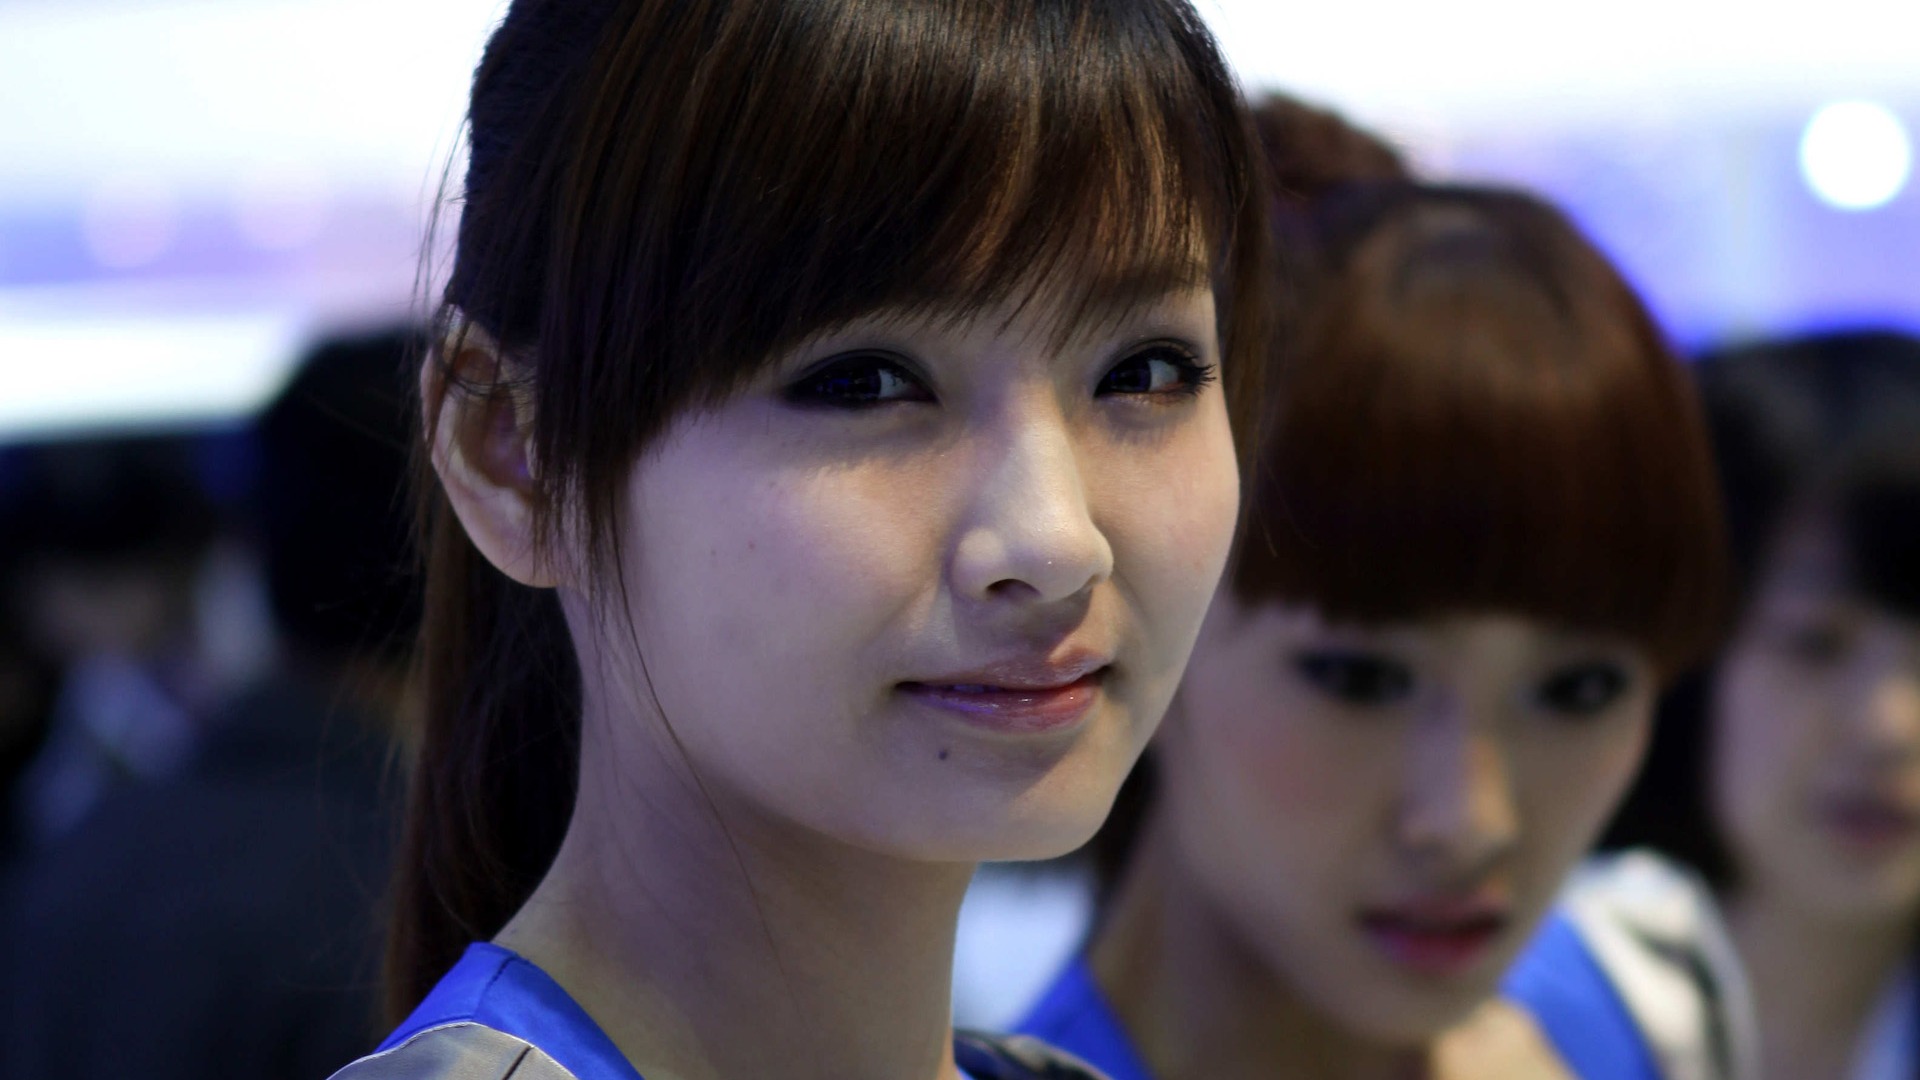 2010 Beijing Auto Show car models Collection (2) #3 - 1920x1080